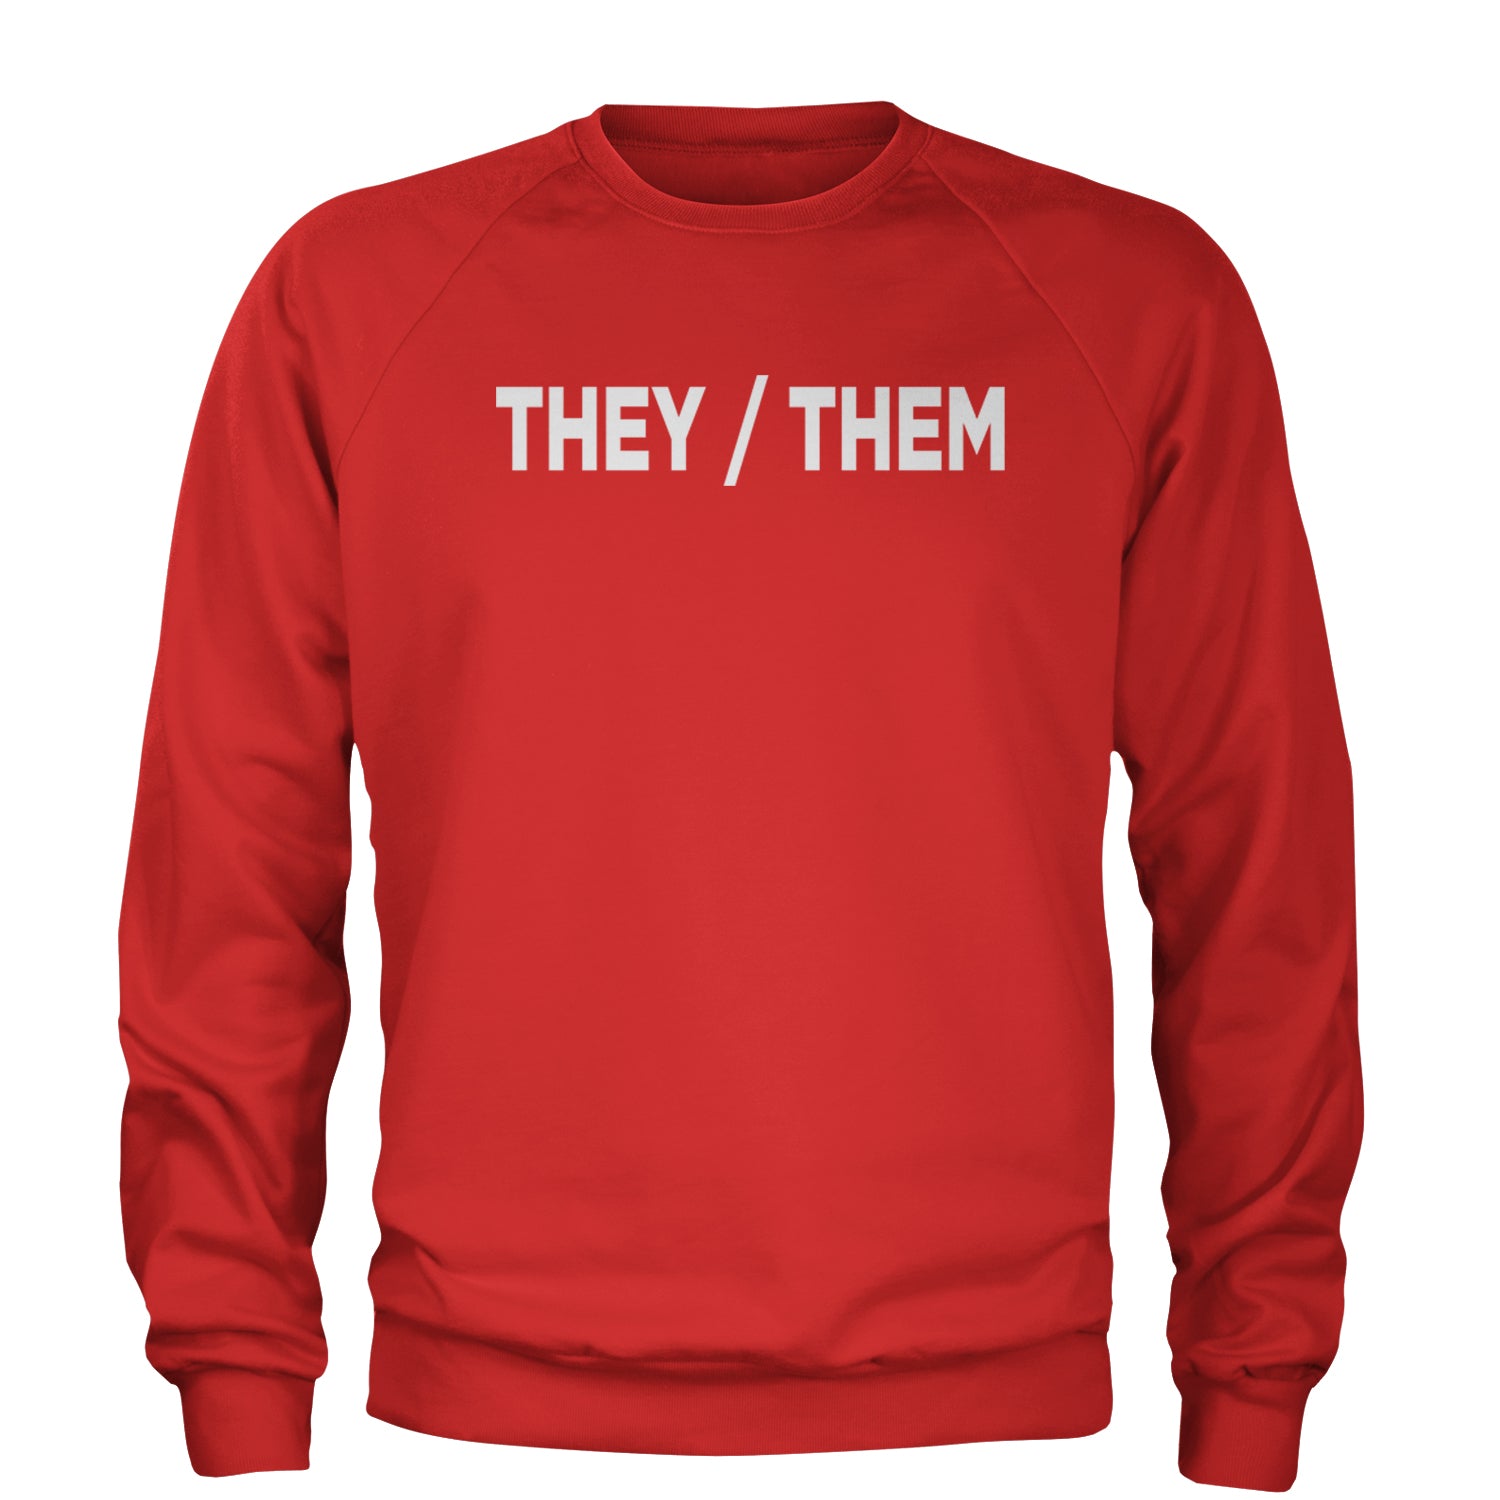 They Them Gender Pronouns Diversity and Inclusion Adult Crewneck Sweatshirt binary, civil, gay, he, her, him, nonbinary, pride, rights, she, them, they by Expression Tees